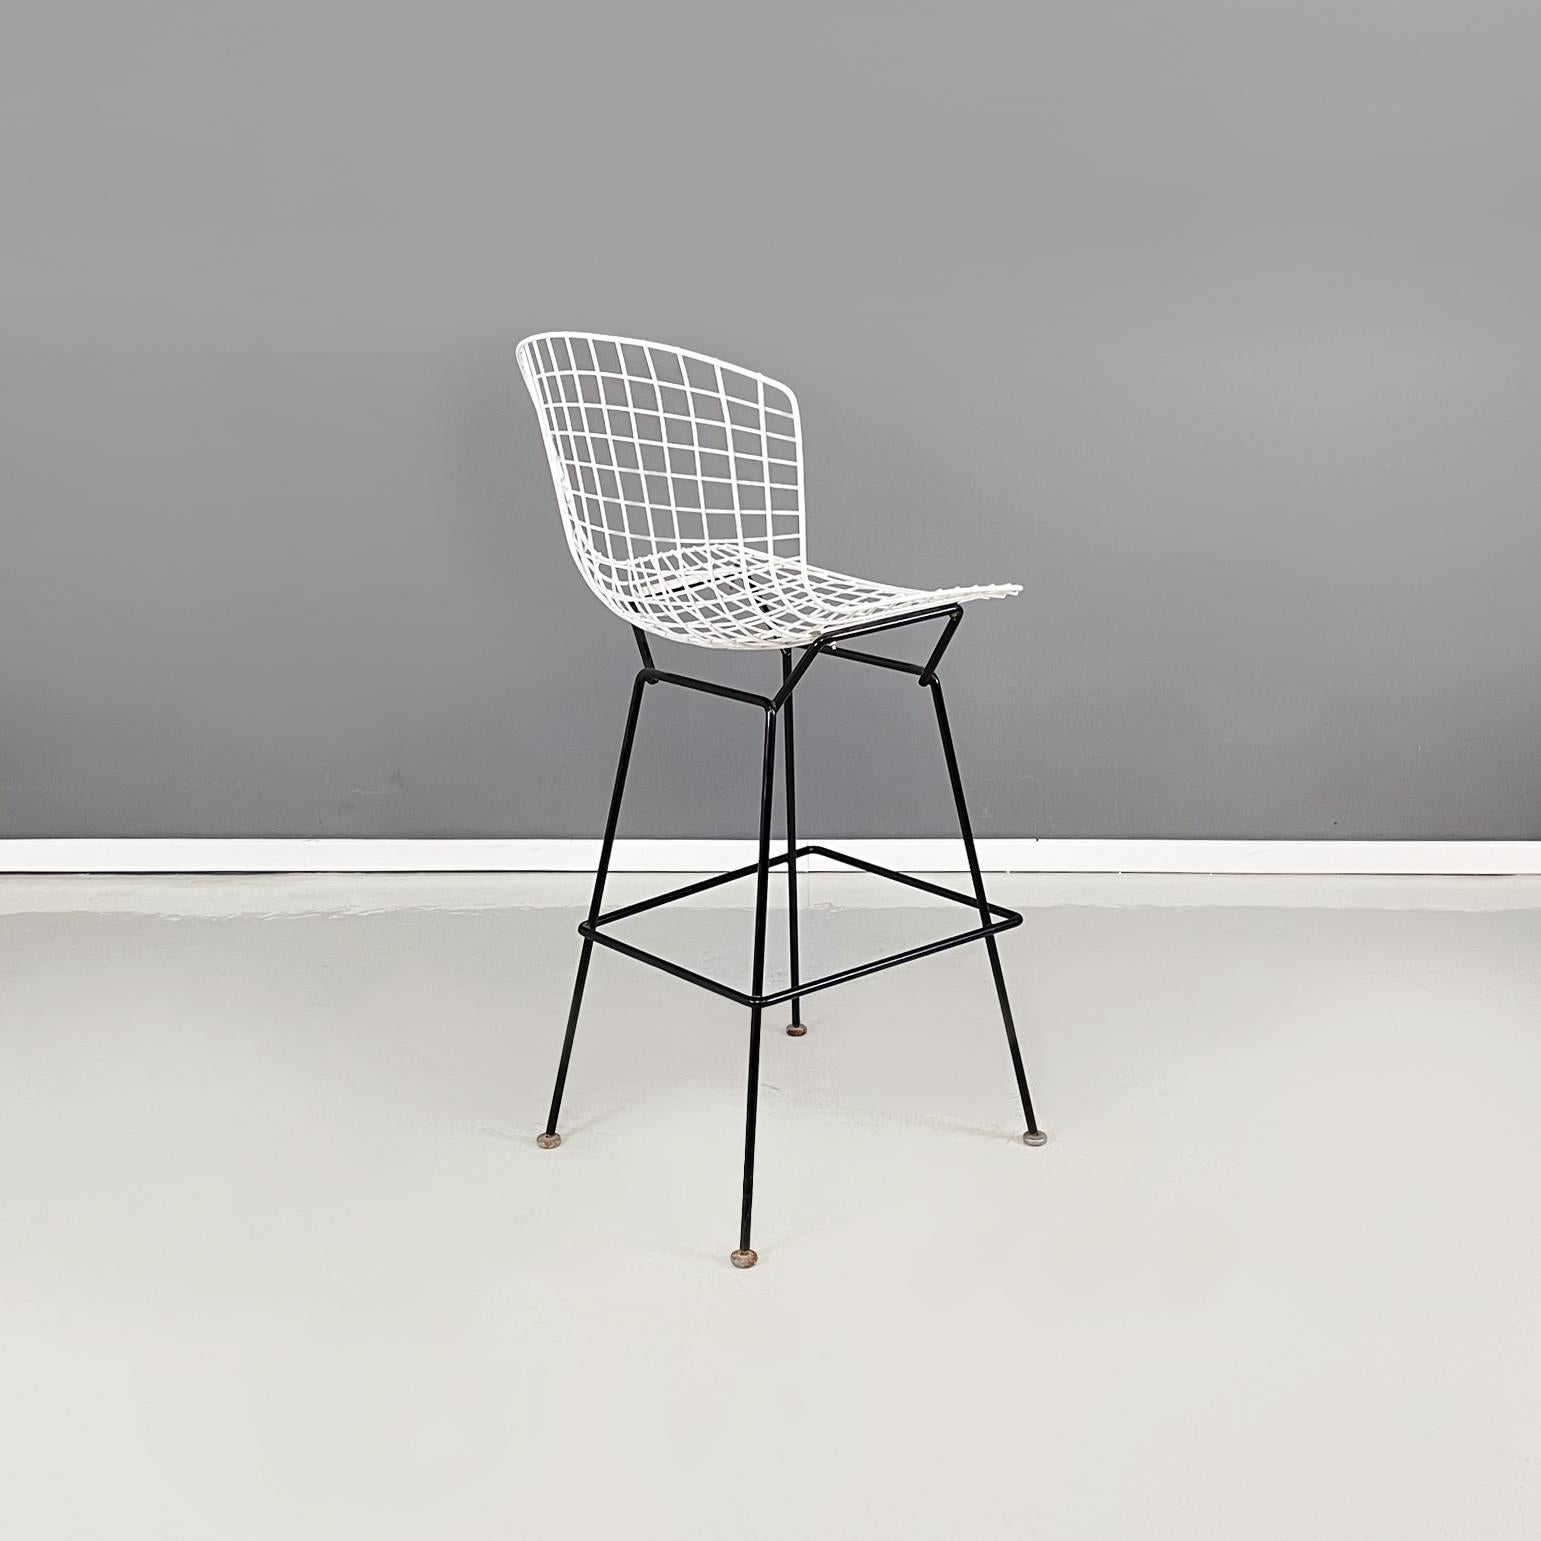 American Midcentury Black White Metal High Stools by Bertoia for Knoll, 1960s In Good Condition For Sale In MIlano, IT